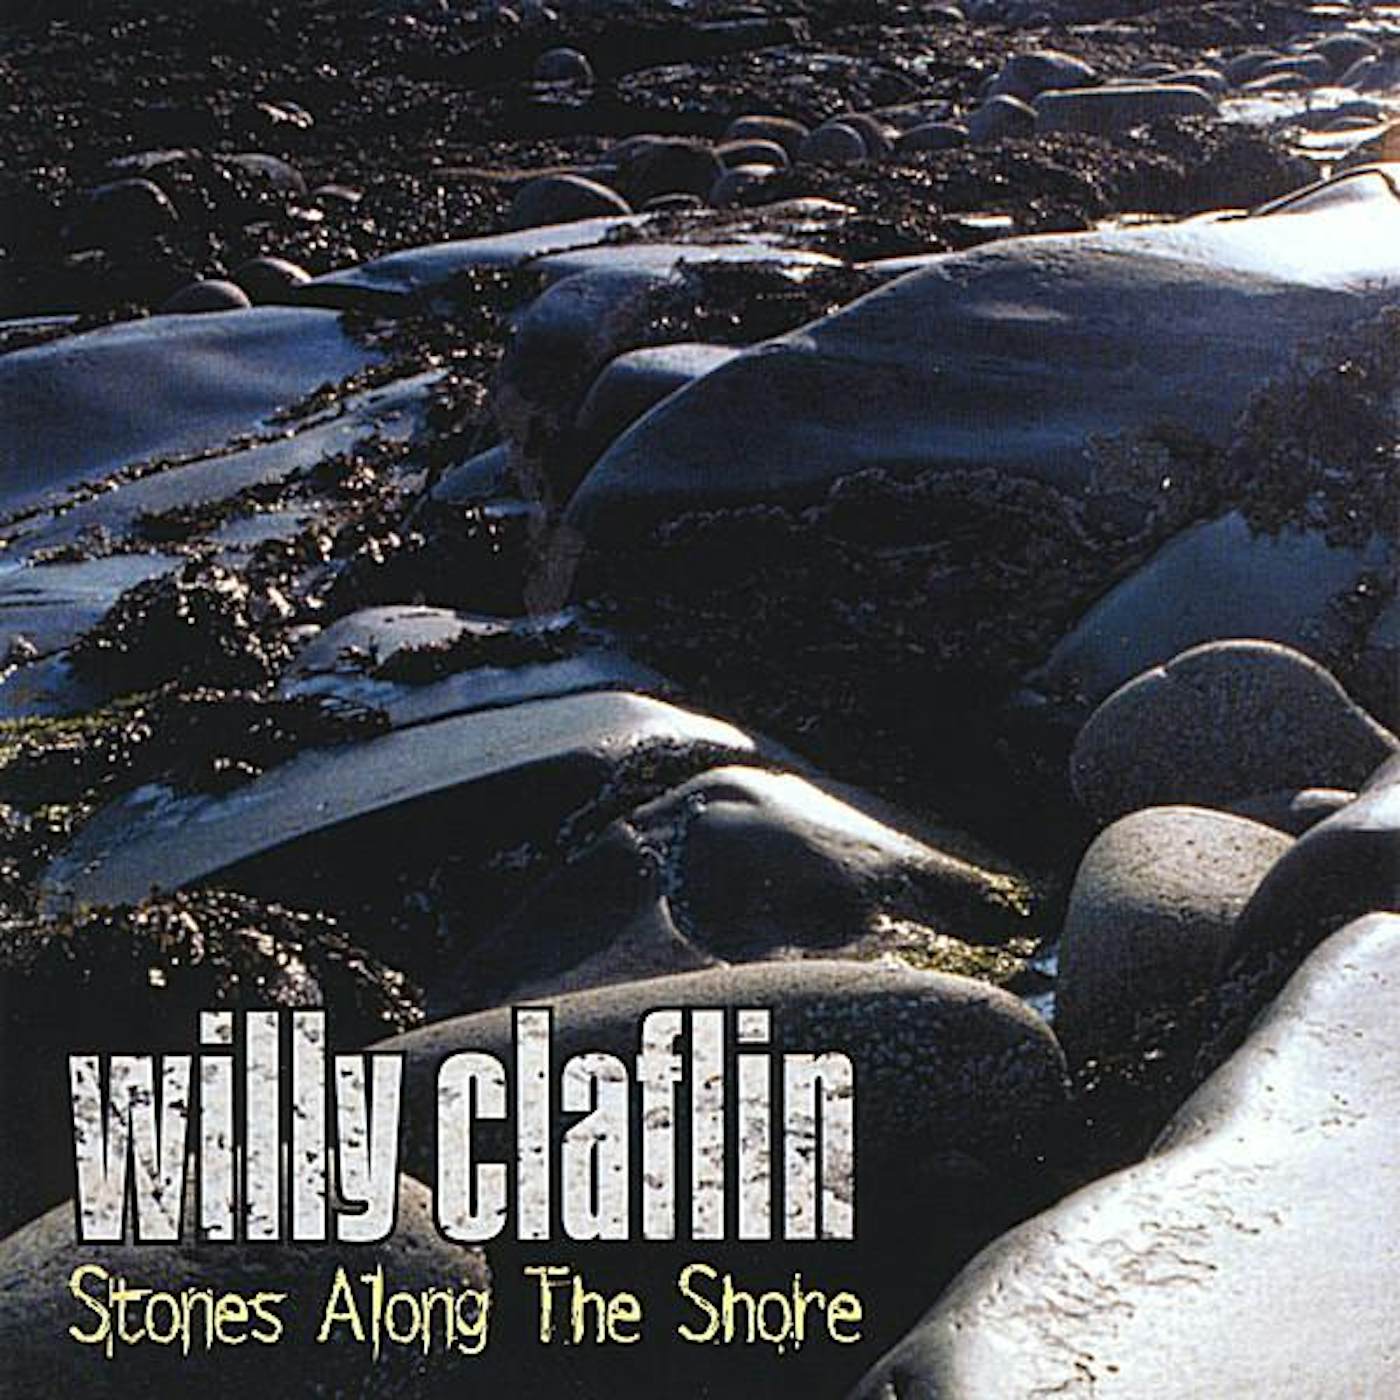 Willy Claflin STONES ALONG THE SHORE CD